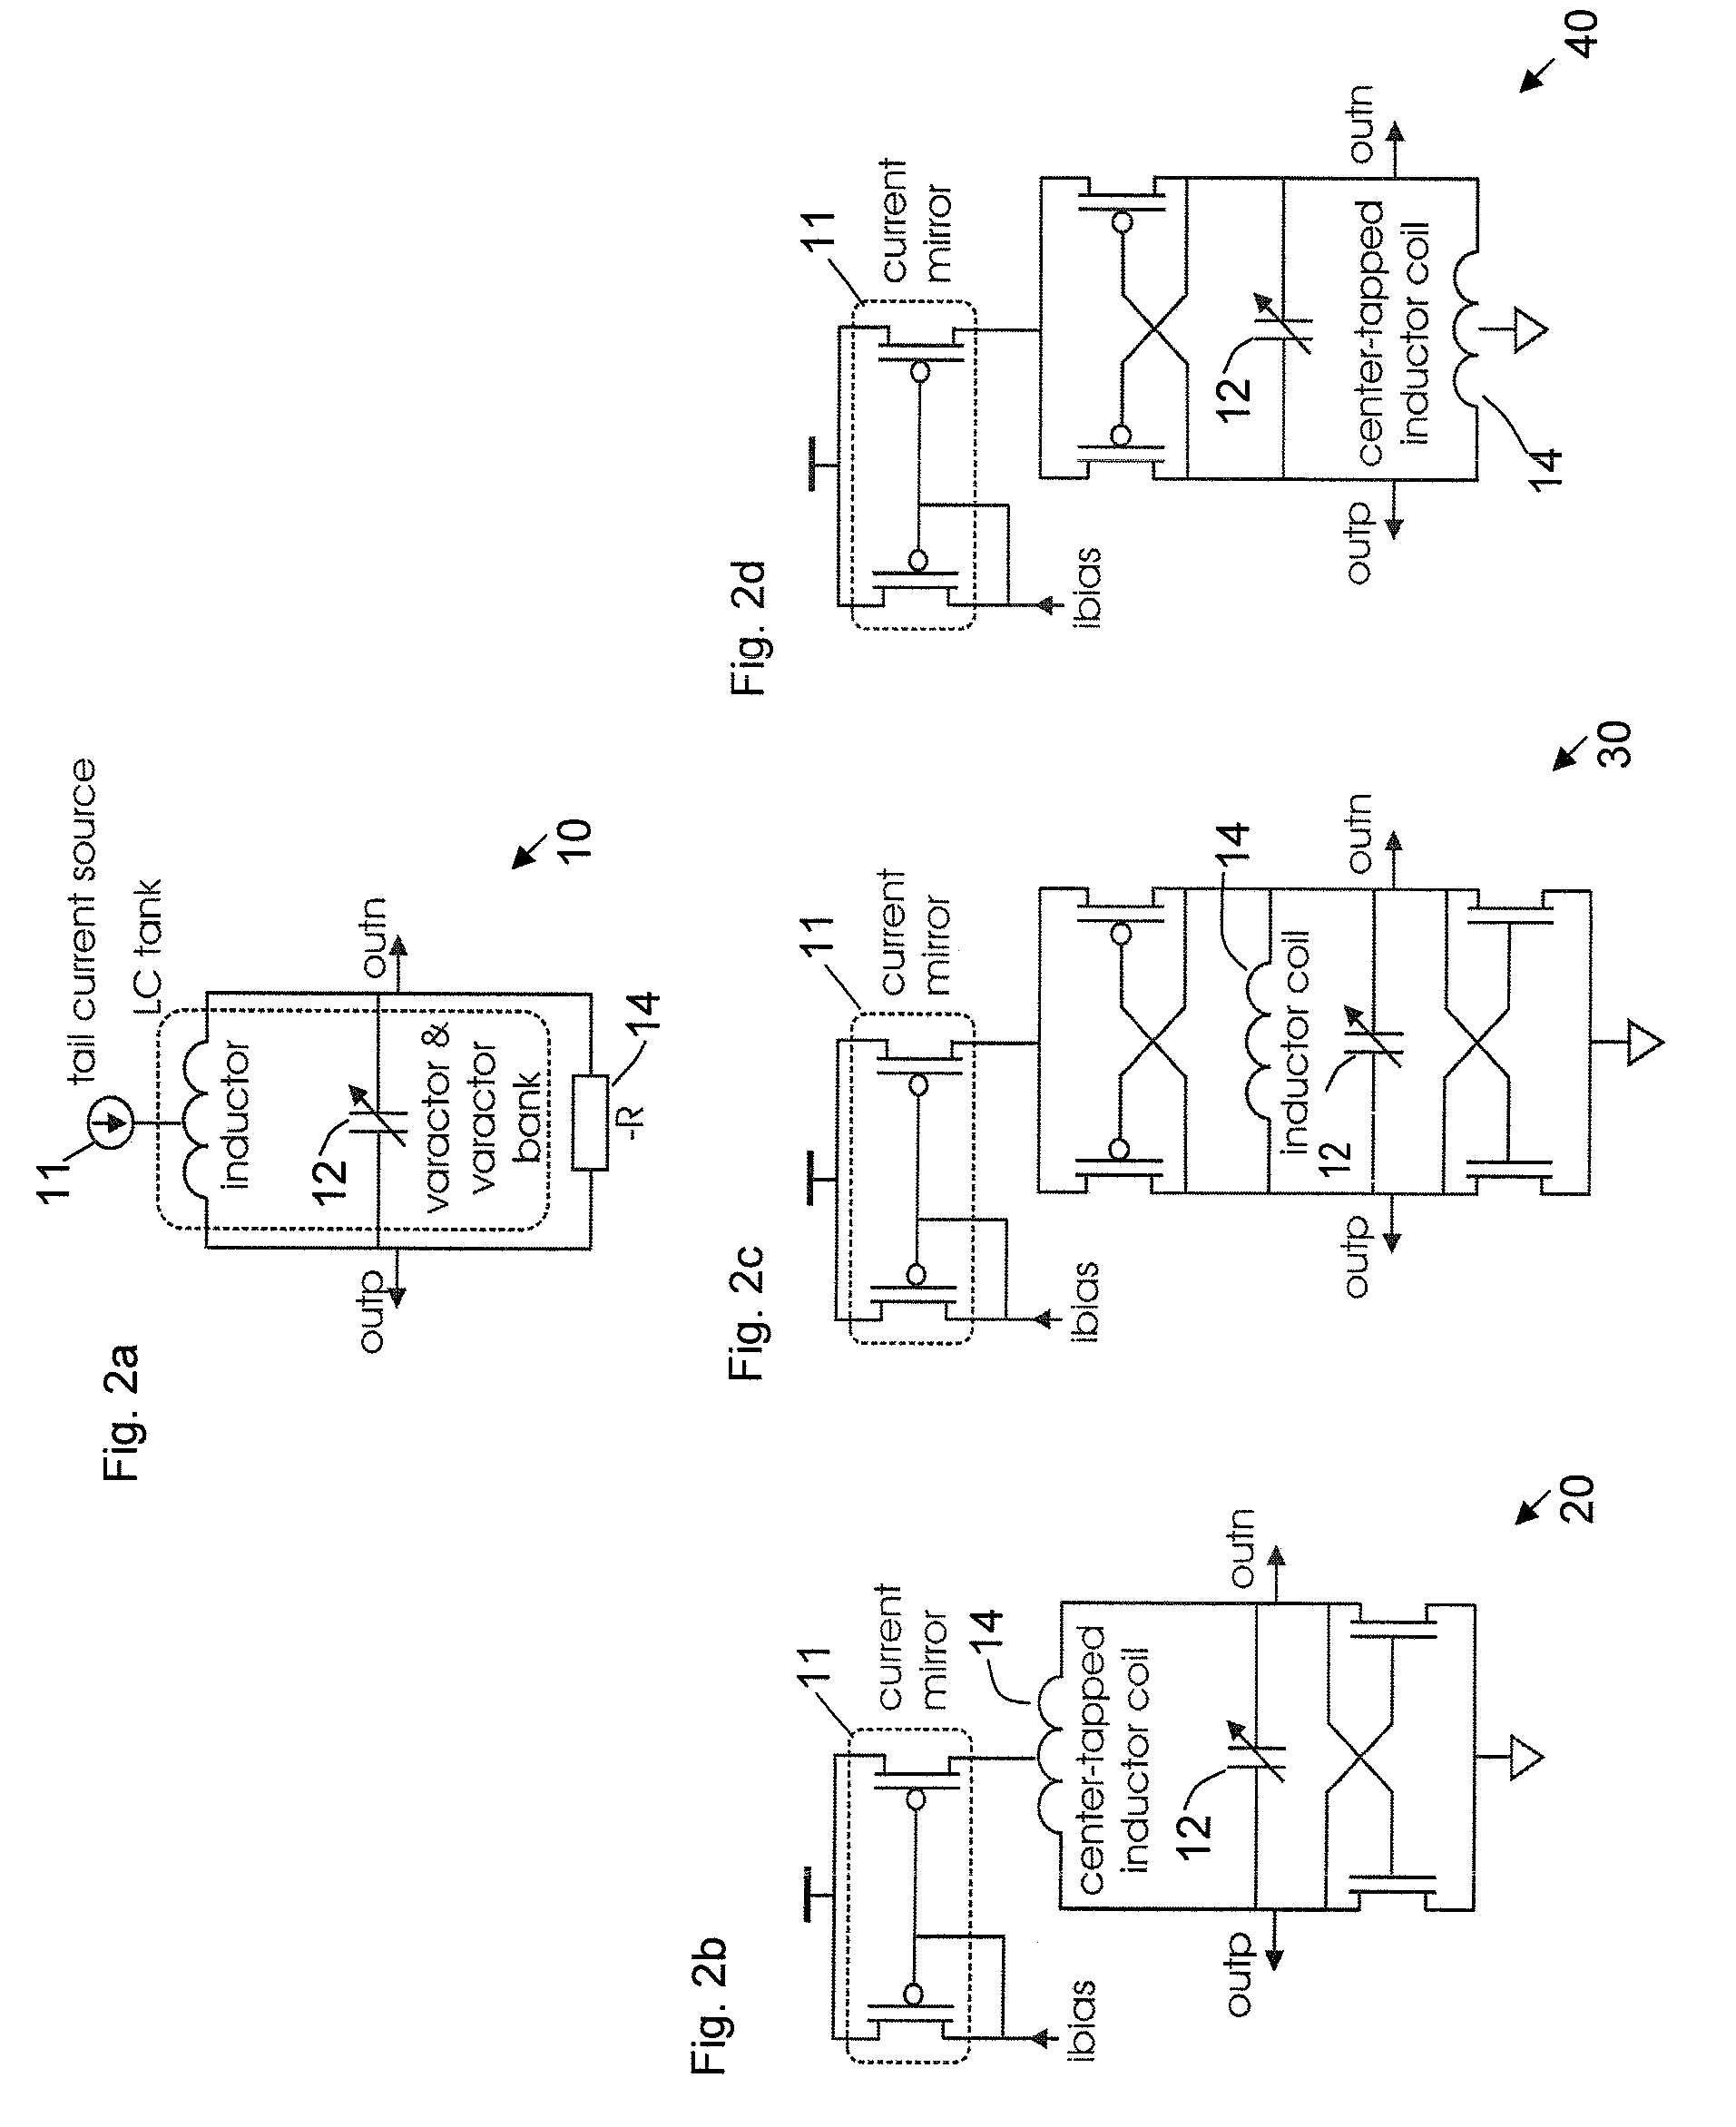 Varactor bank switching based on negative control voltage generation